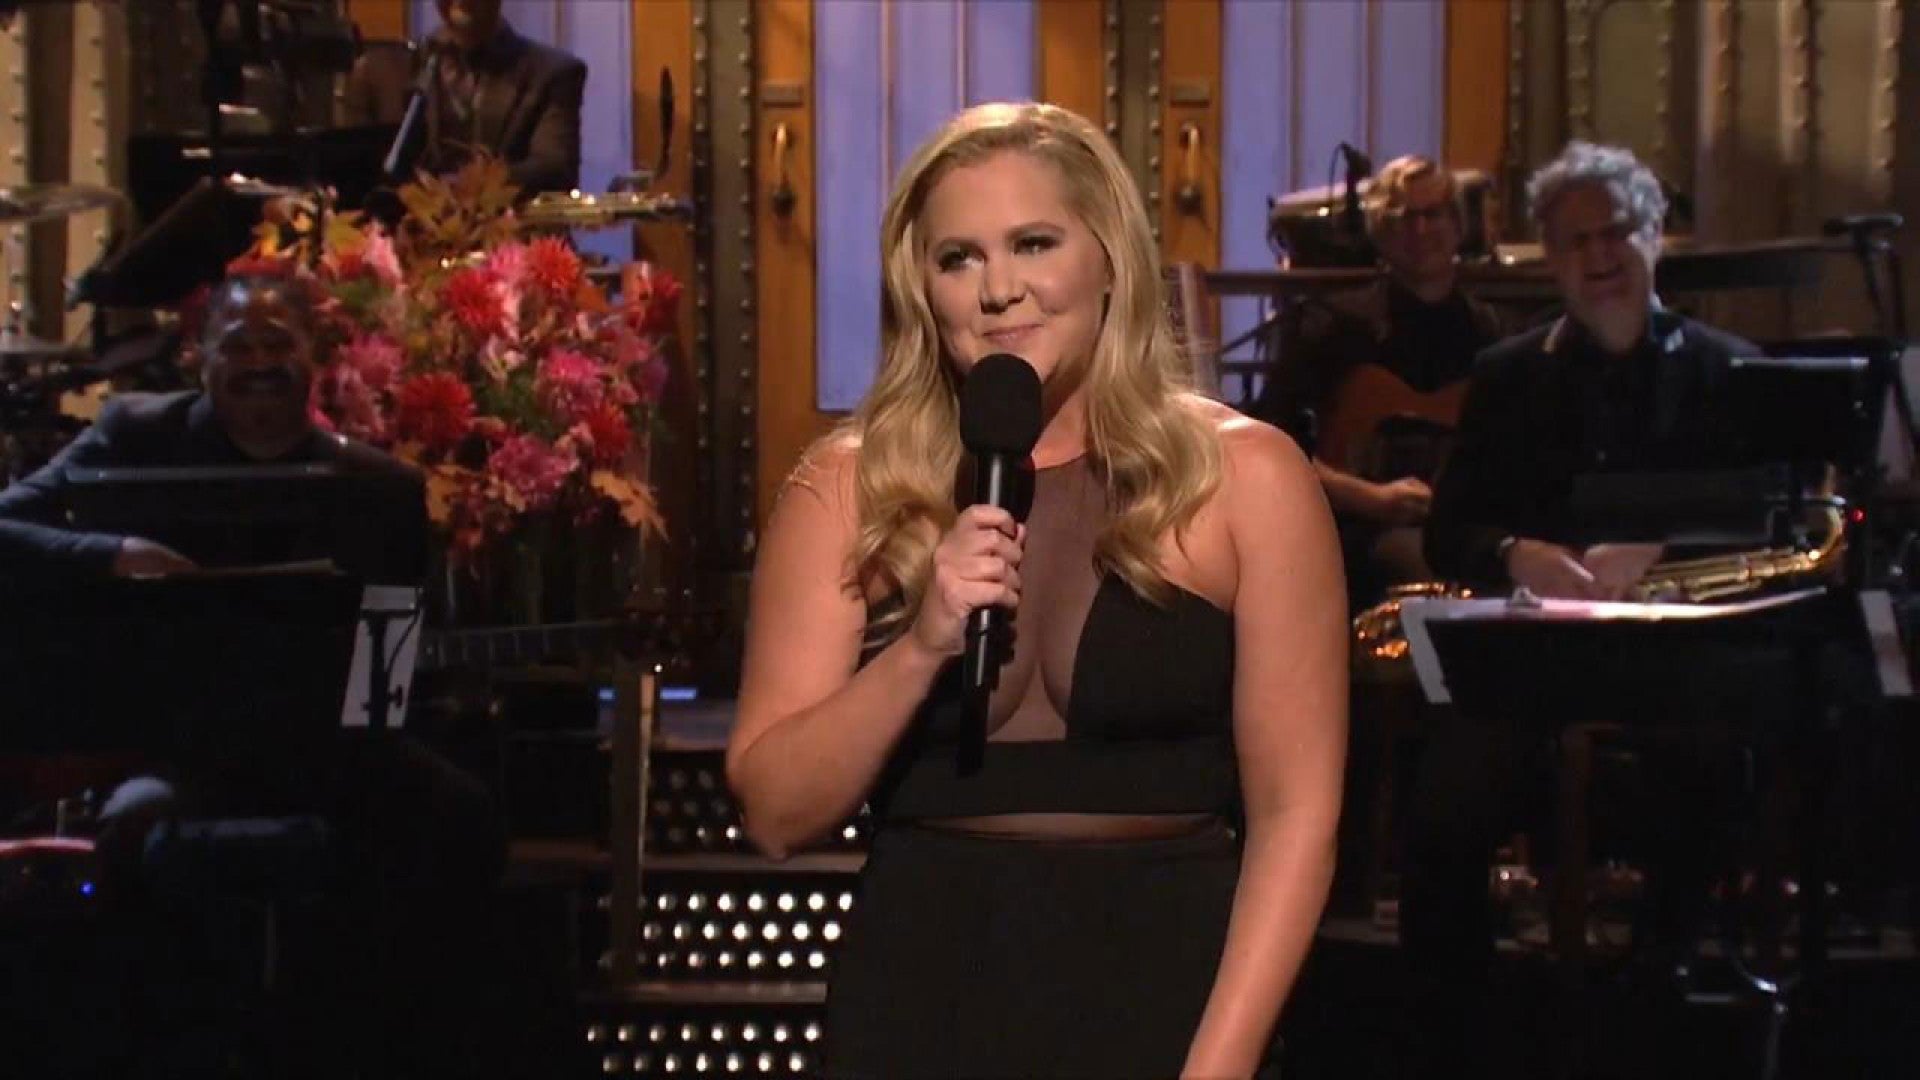 Amy Schumer Makes the Most of a Tough Weekend for Saturday Night Live